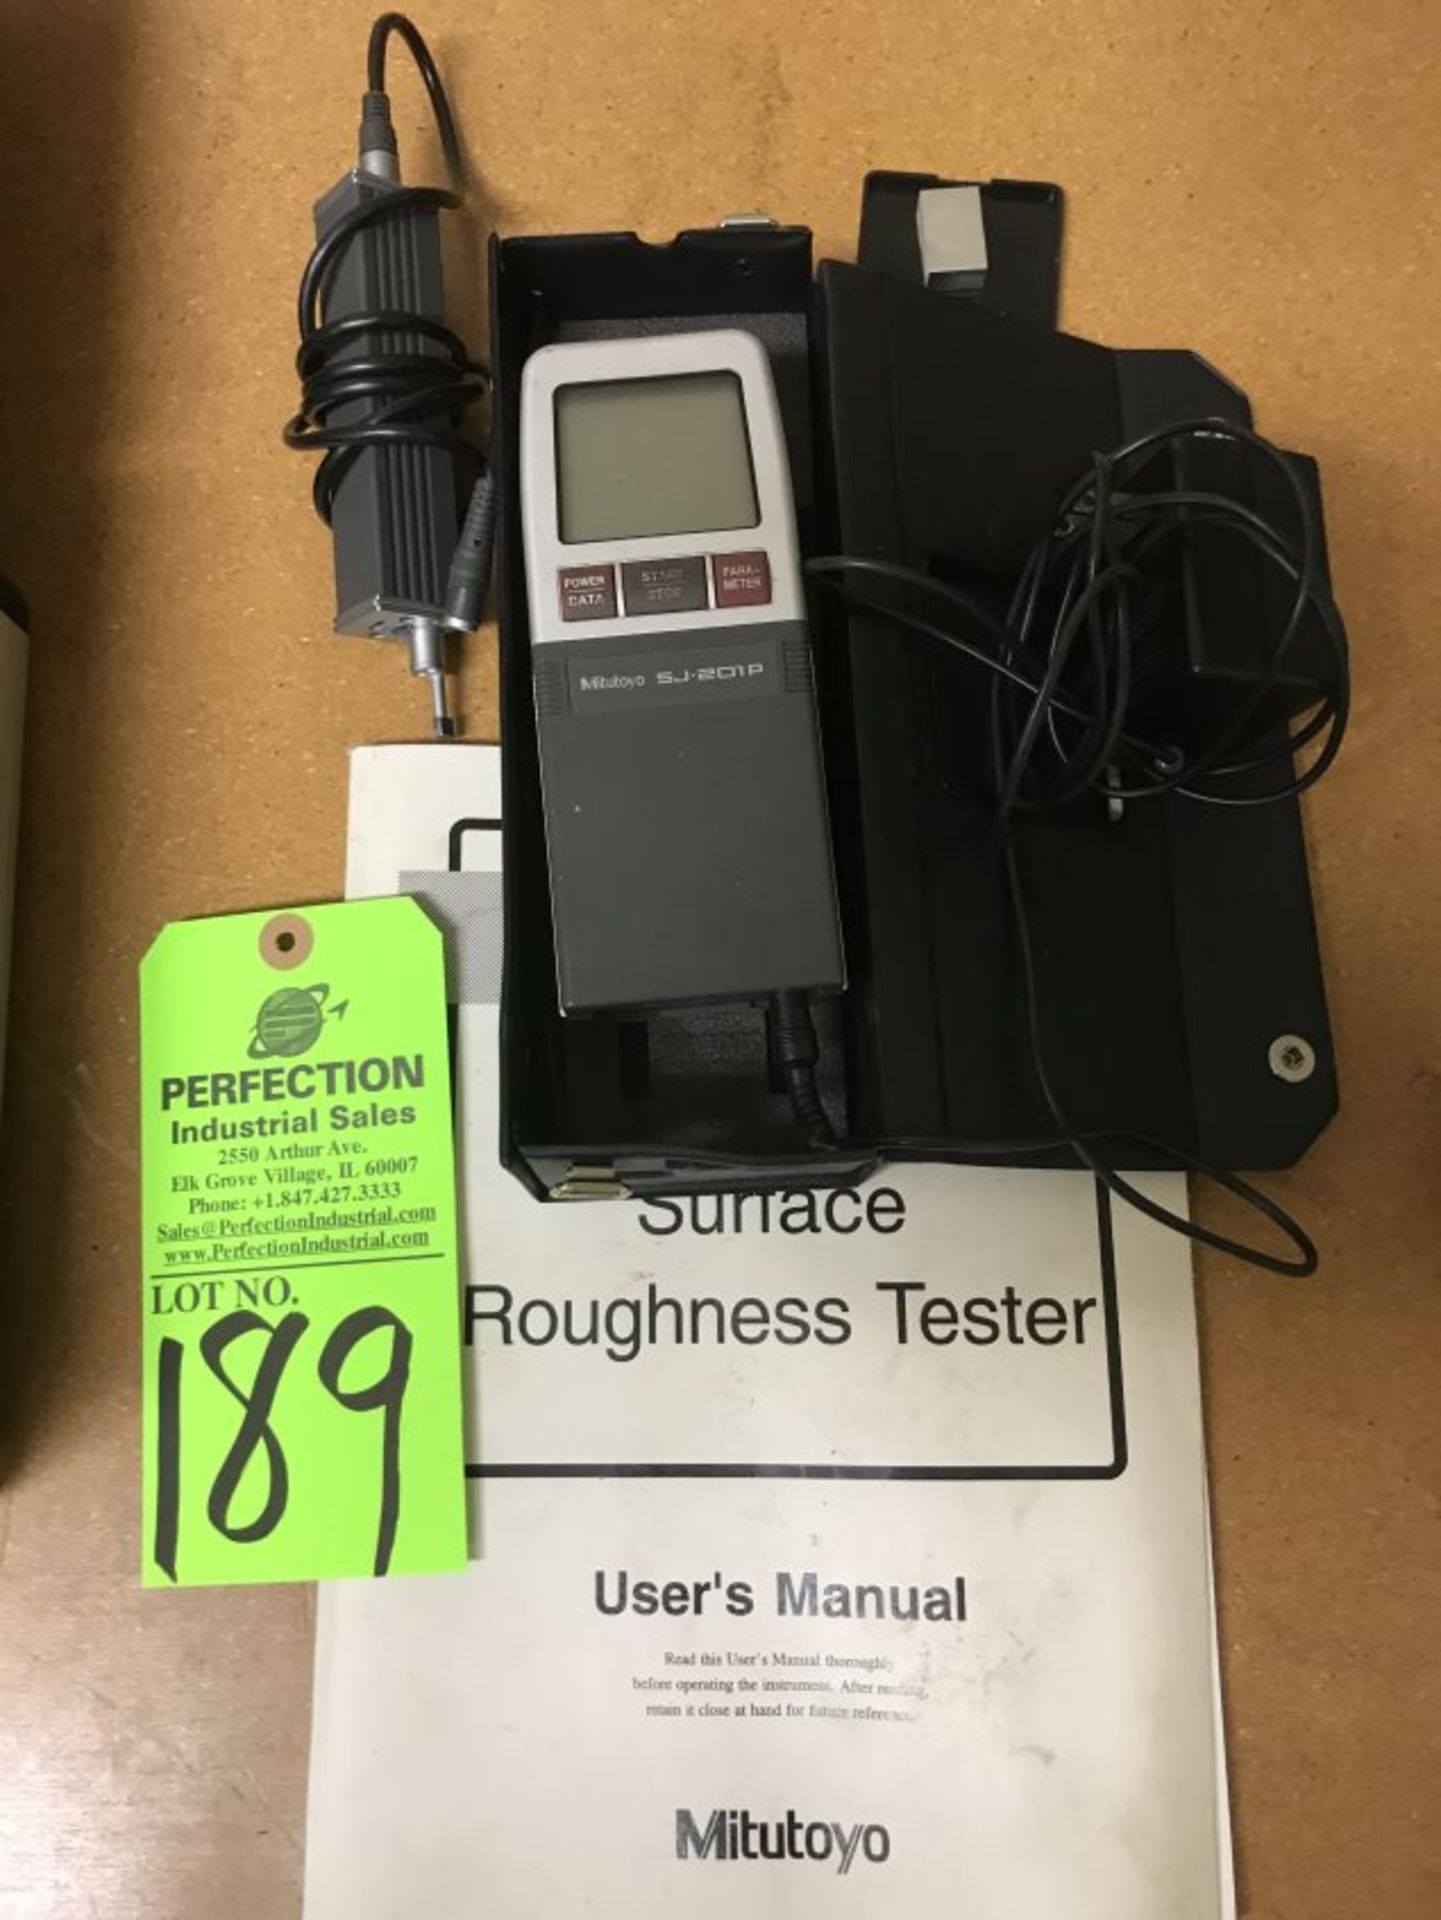 Mitutoyo SJ-201P Surface Roughness Tester